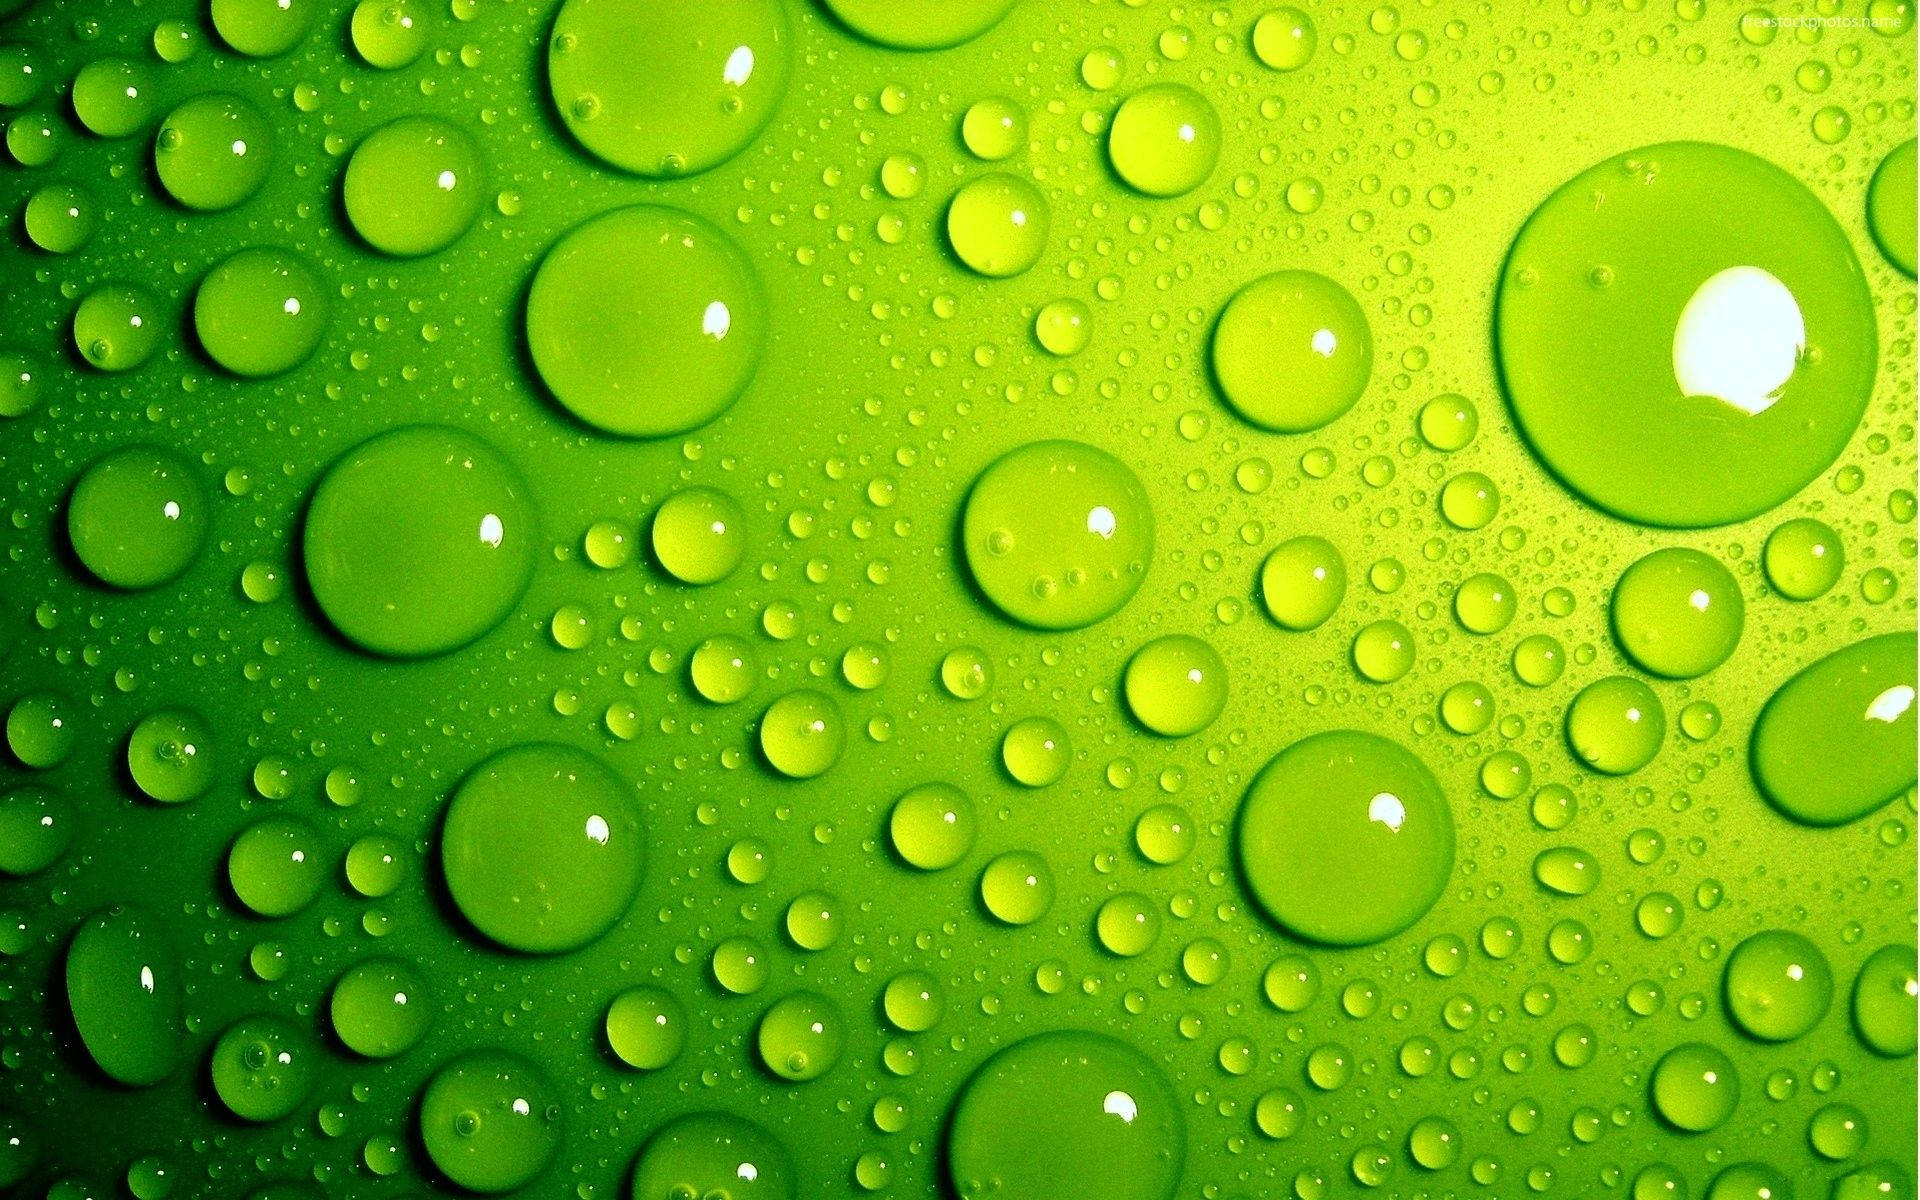 Reflection Of Green In Aqueous Droplets Background